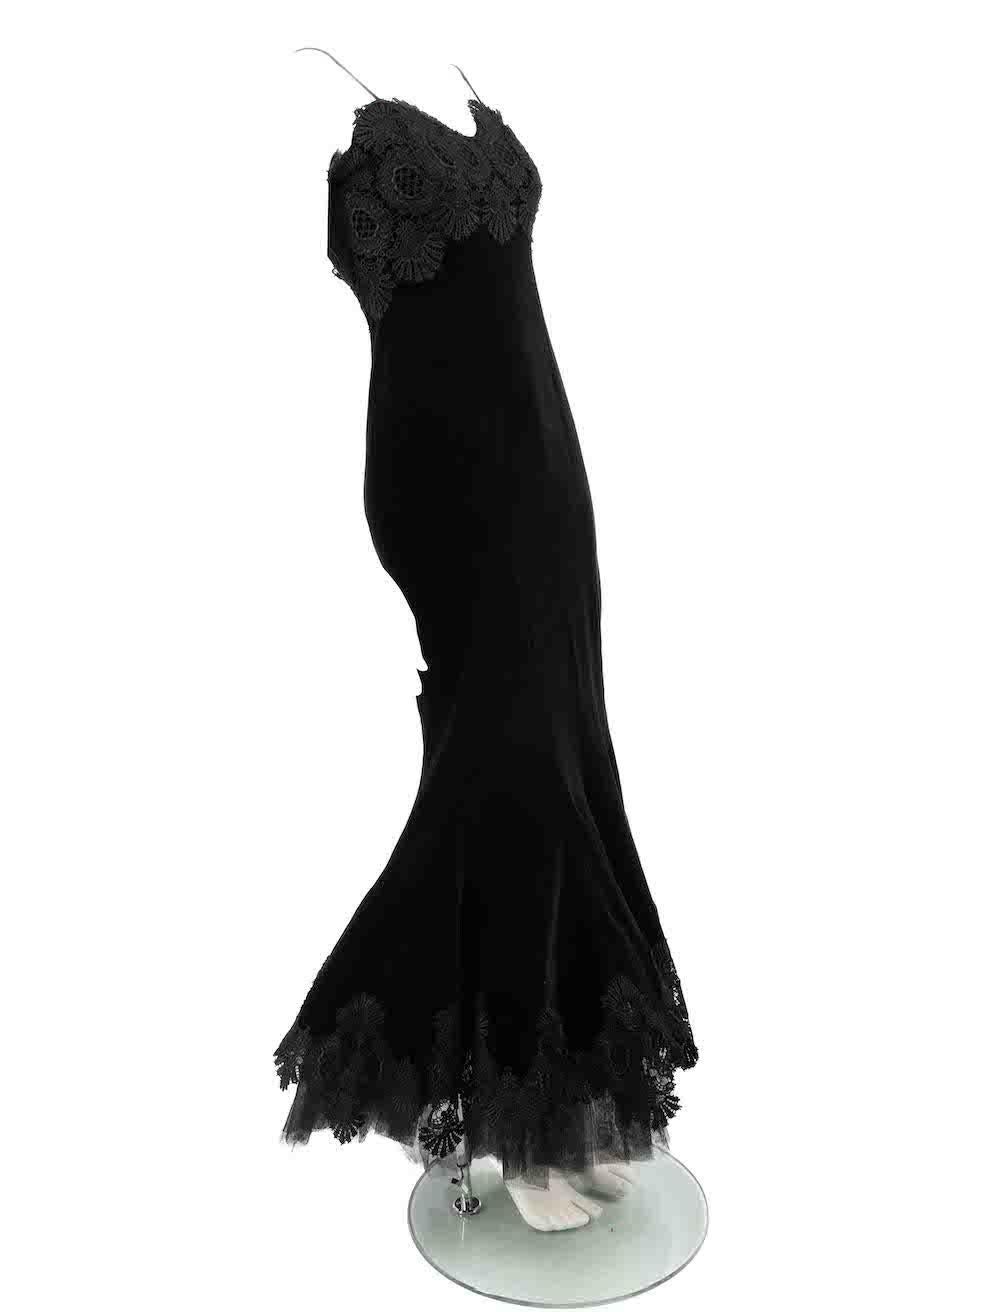 CONDITION is Very good. Minimal wear to dress is evident. Minimal wear to the lining at zip end, where there has been a repair on this used Jiki designer resale item.
 
 
 
 Details
 
 
 Black
 
 Velvet
 
 Maxi gown
 
 Lace trimmed
 
 Sweetheart